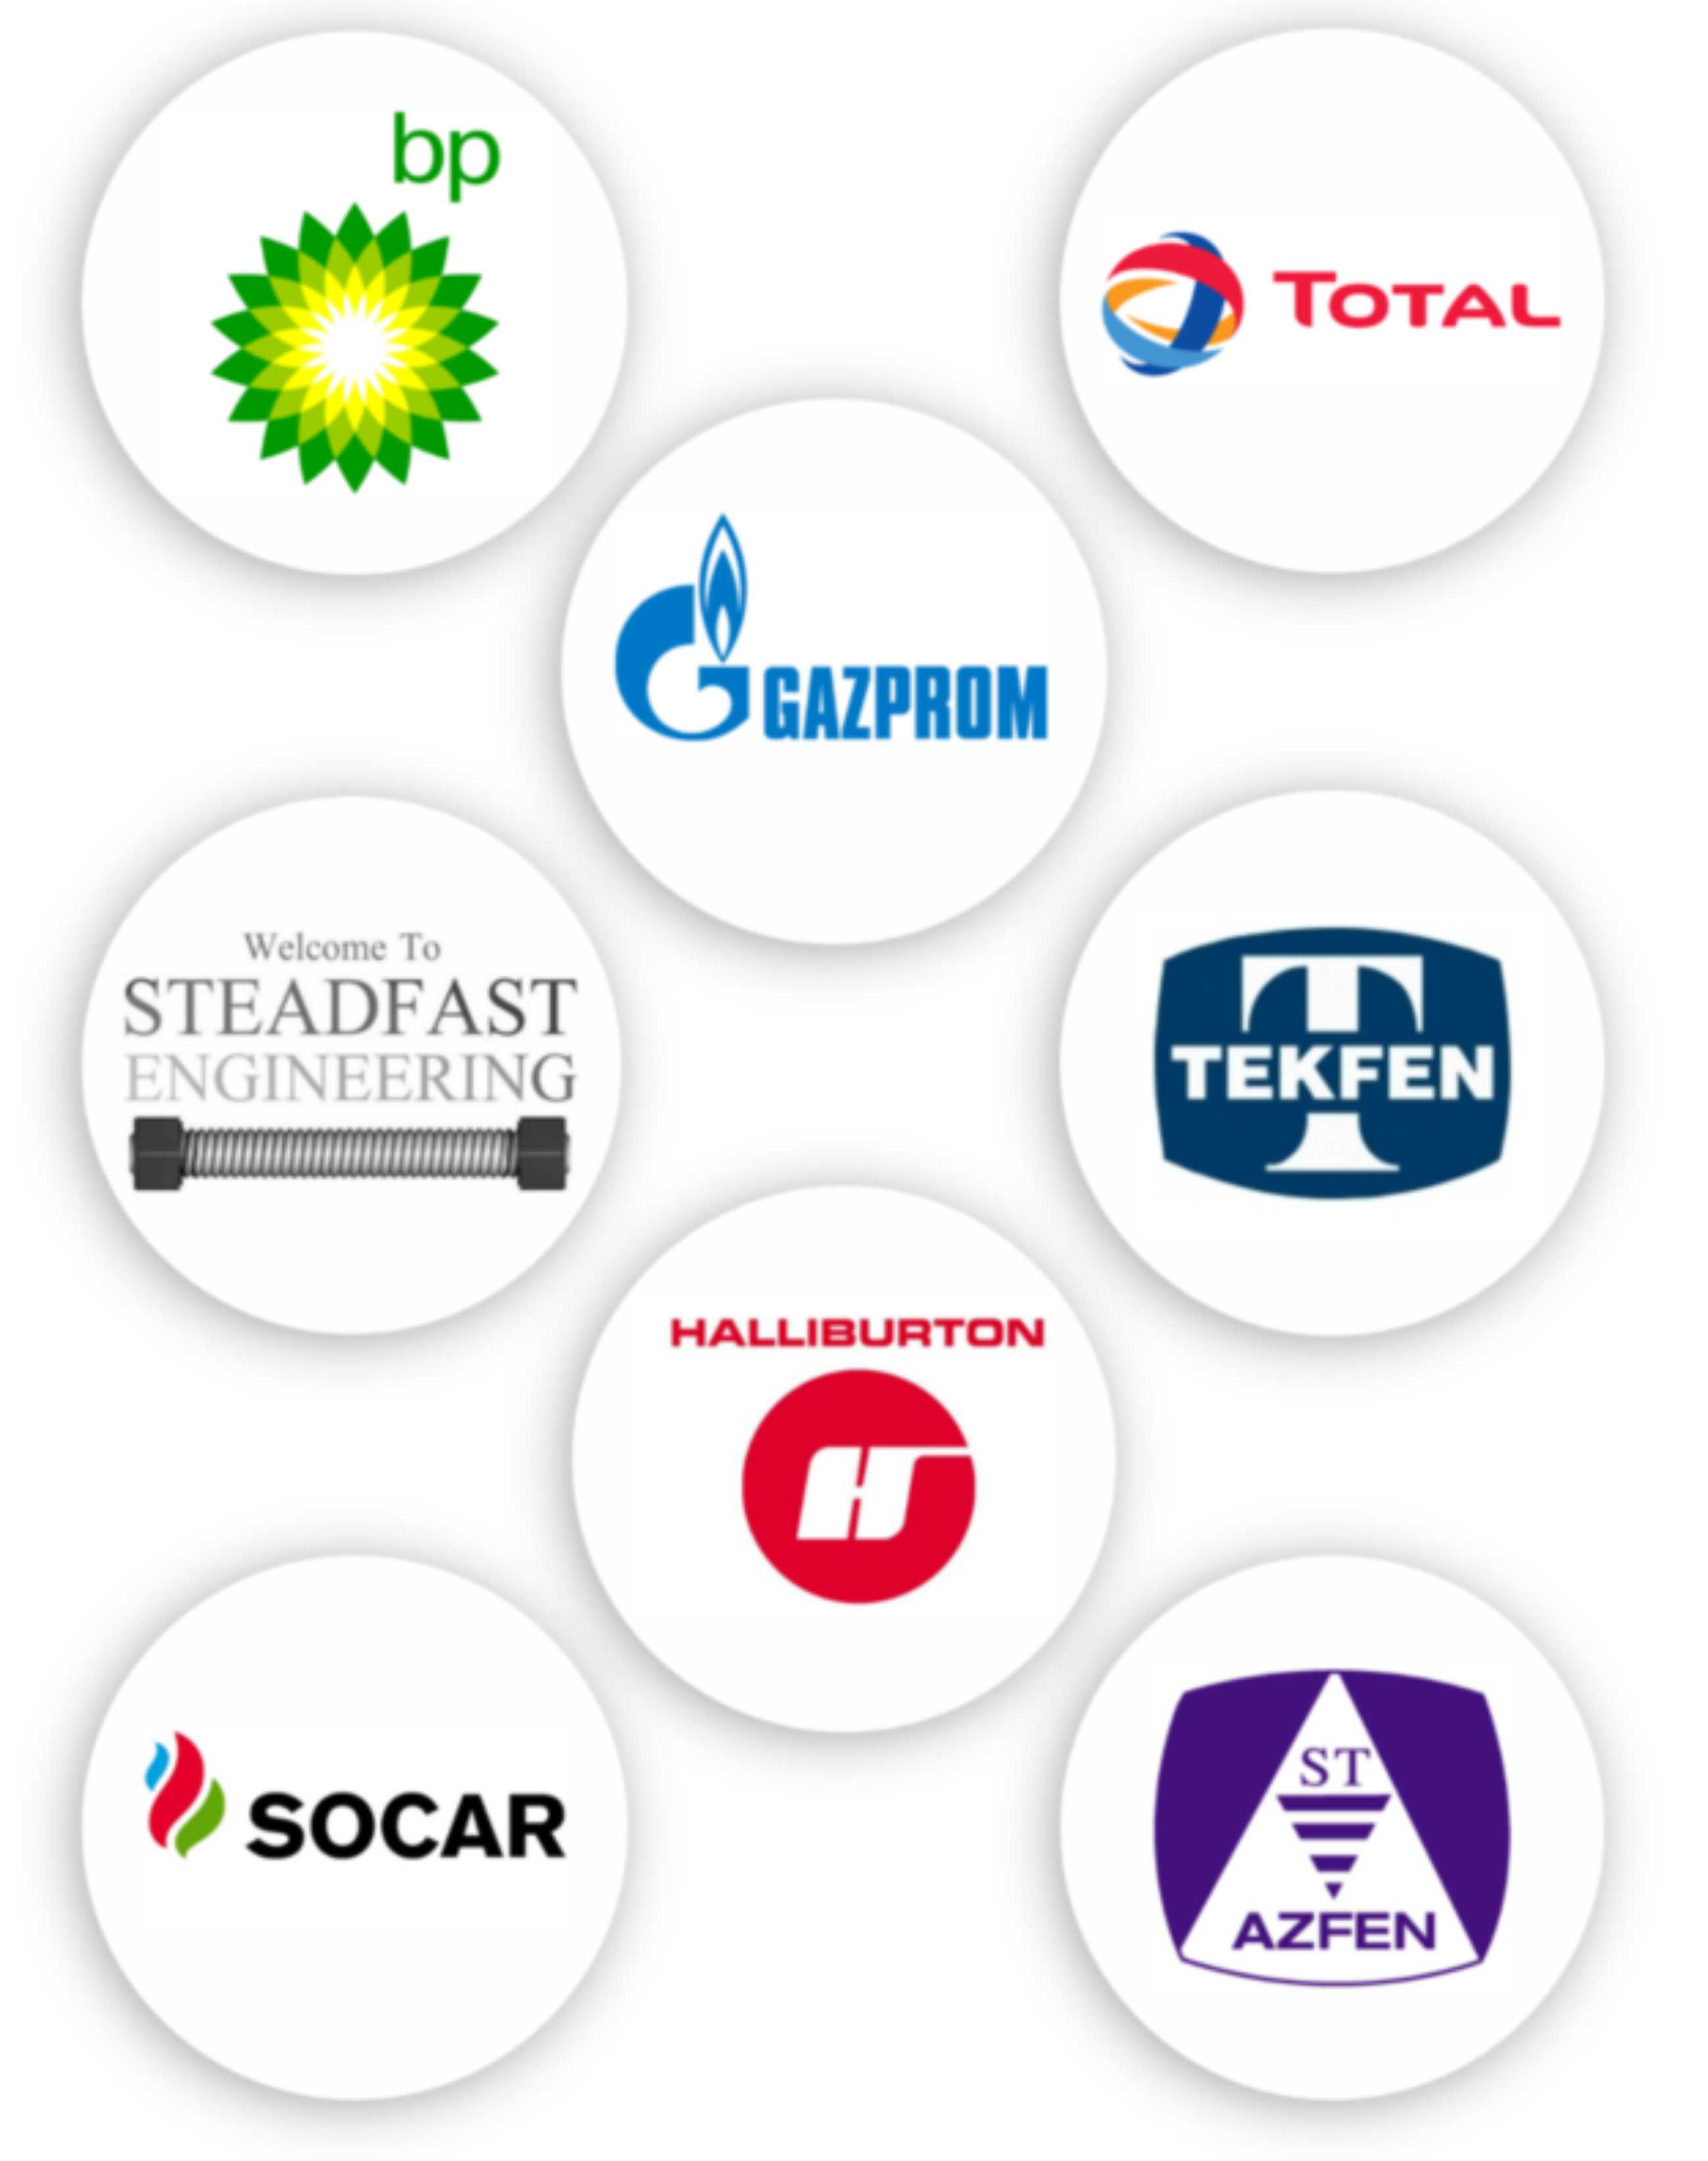 Our partners in the oil and gas sector